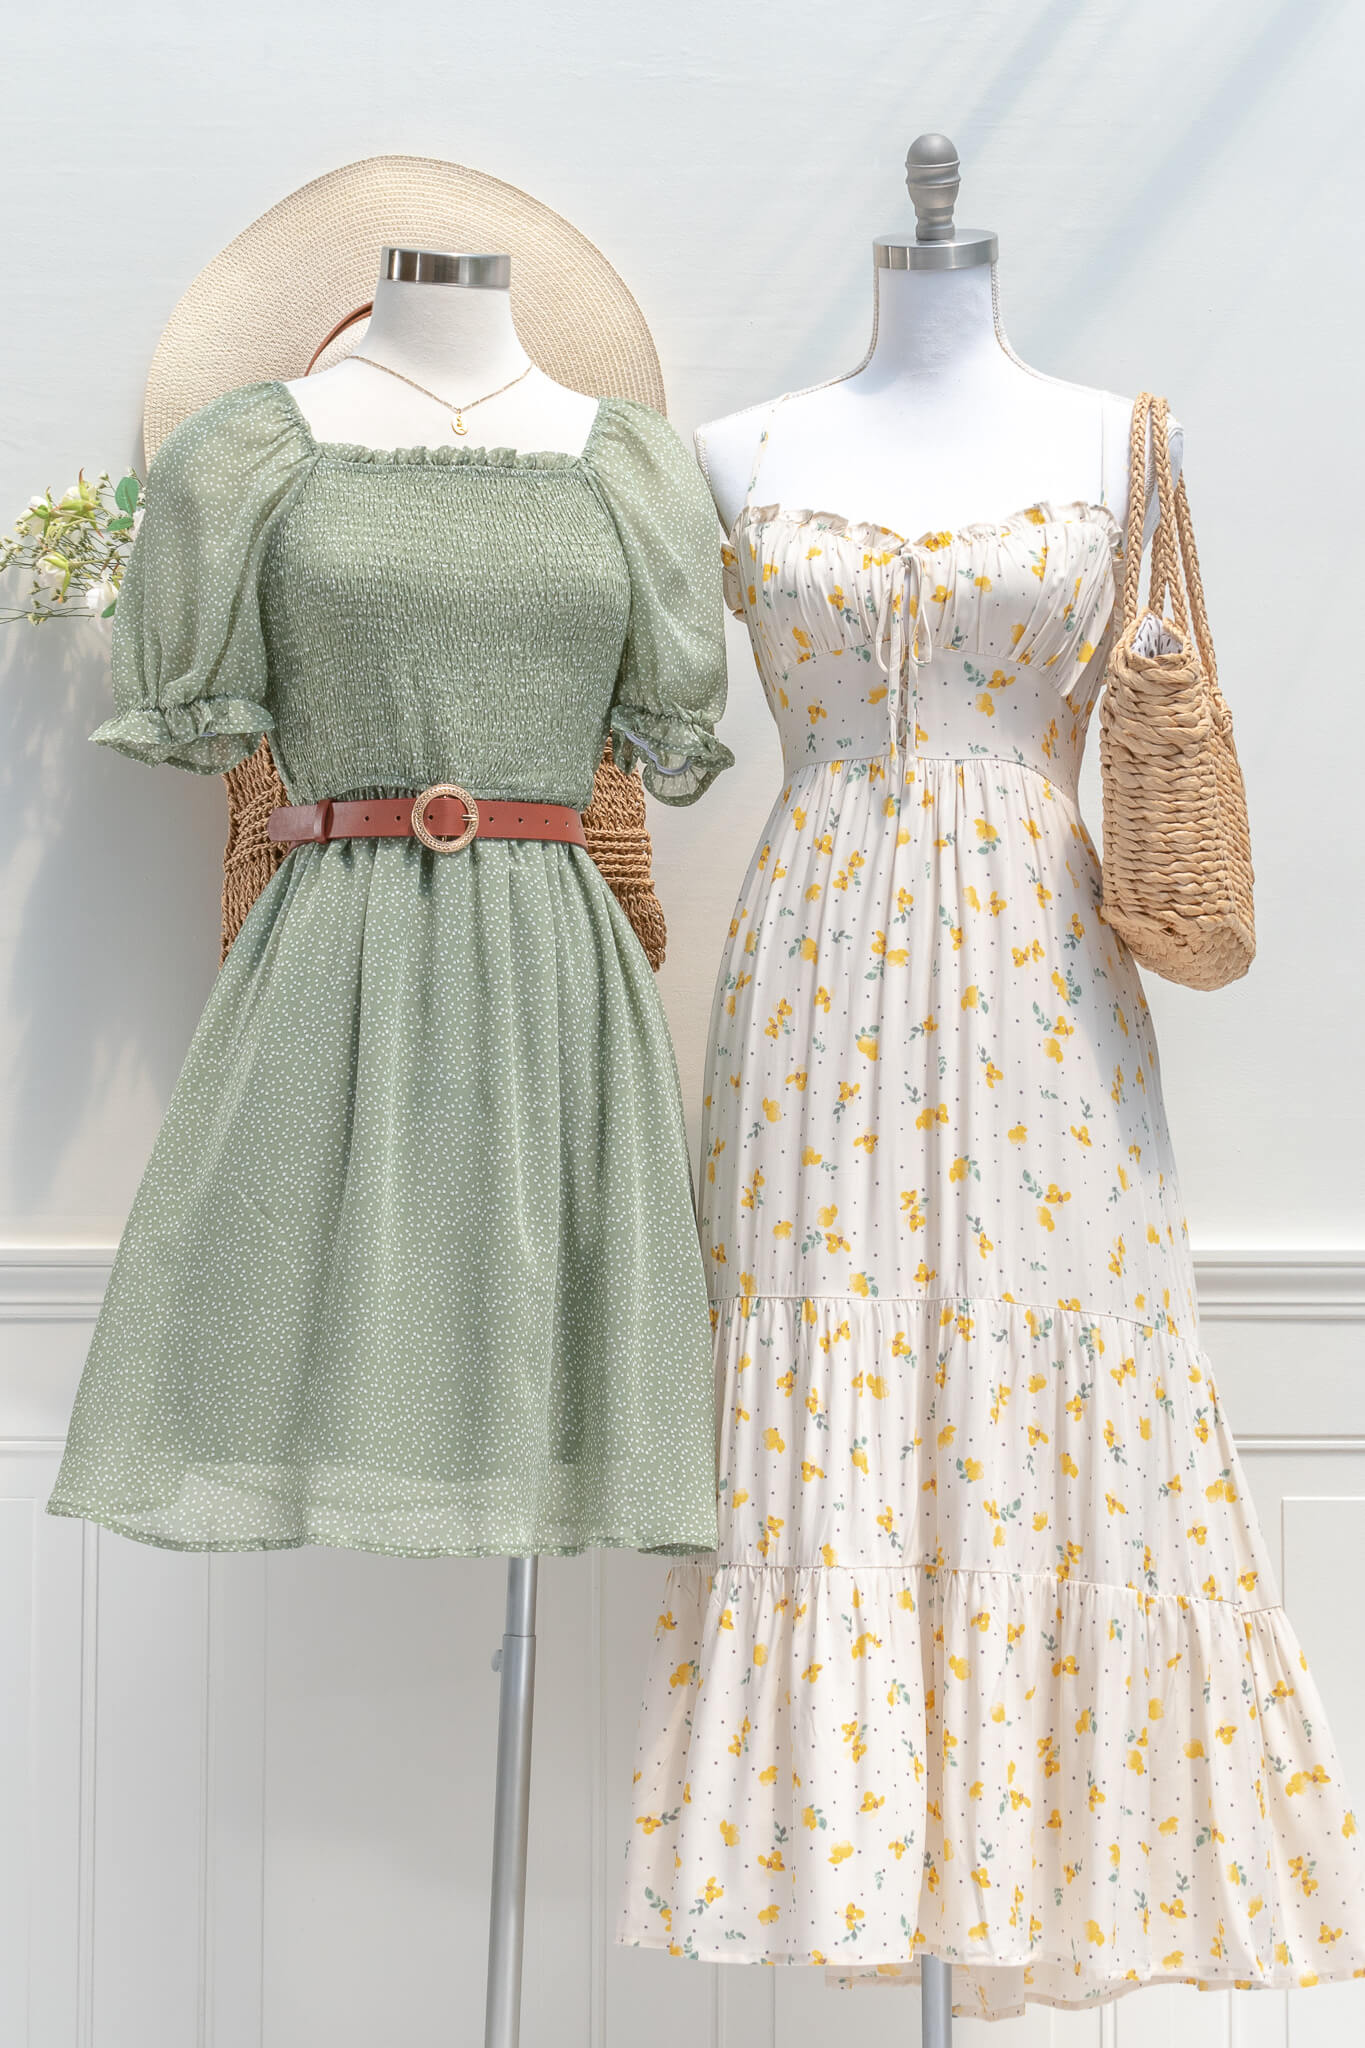 11 cottagecore dresses and outfits to fit the aesthetic style